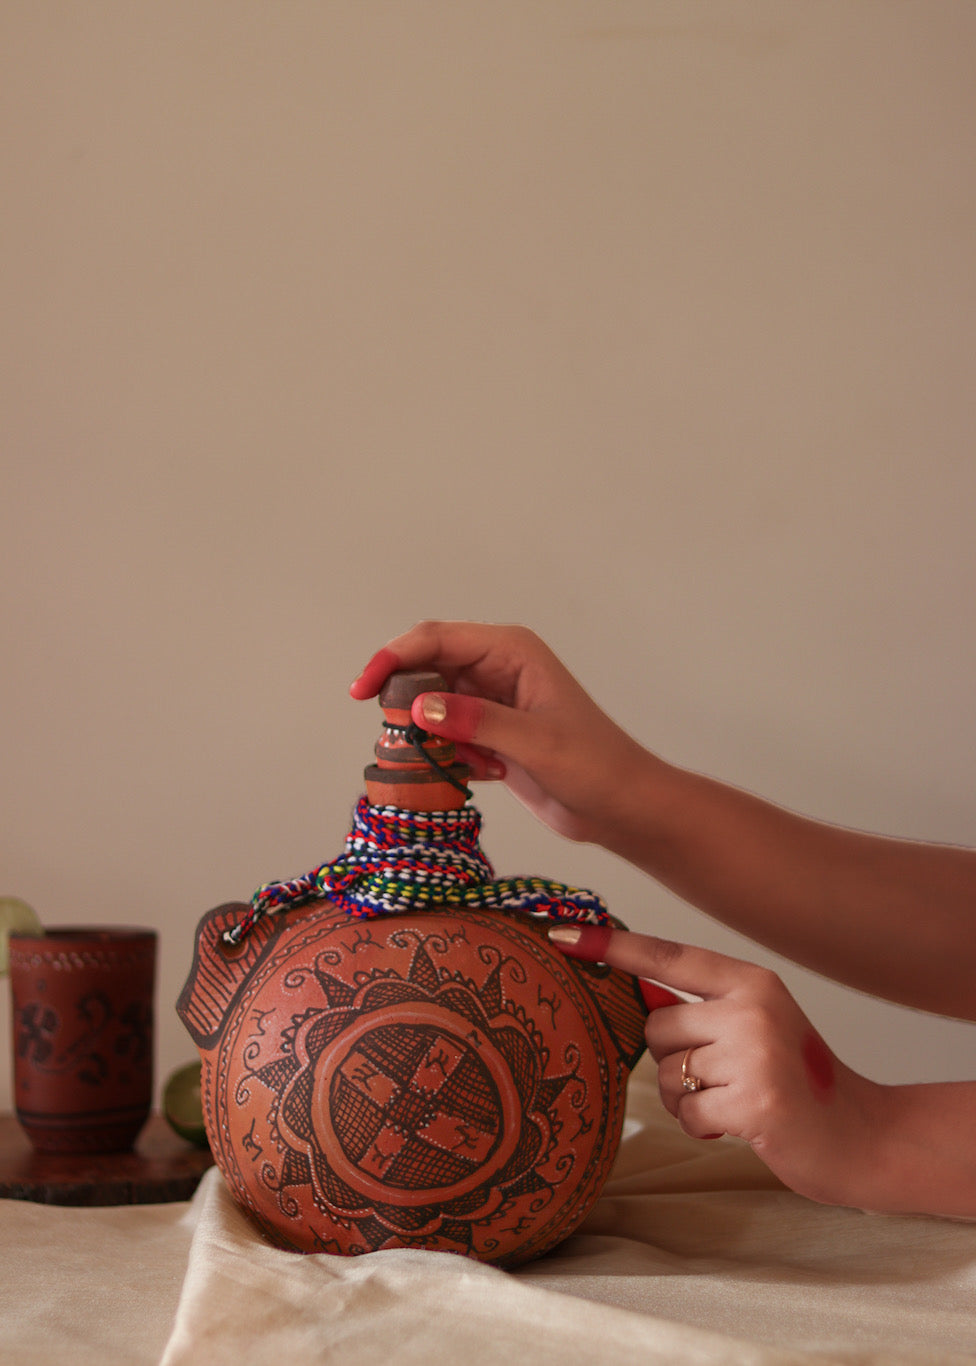 A red hand painted clay water bottle and red hand painted clay glass kept on the table